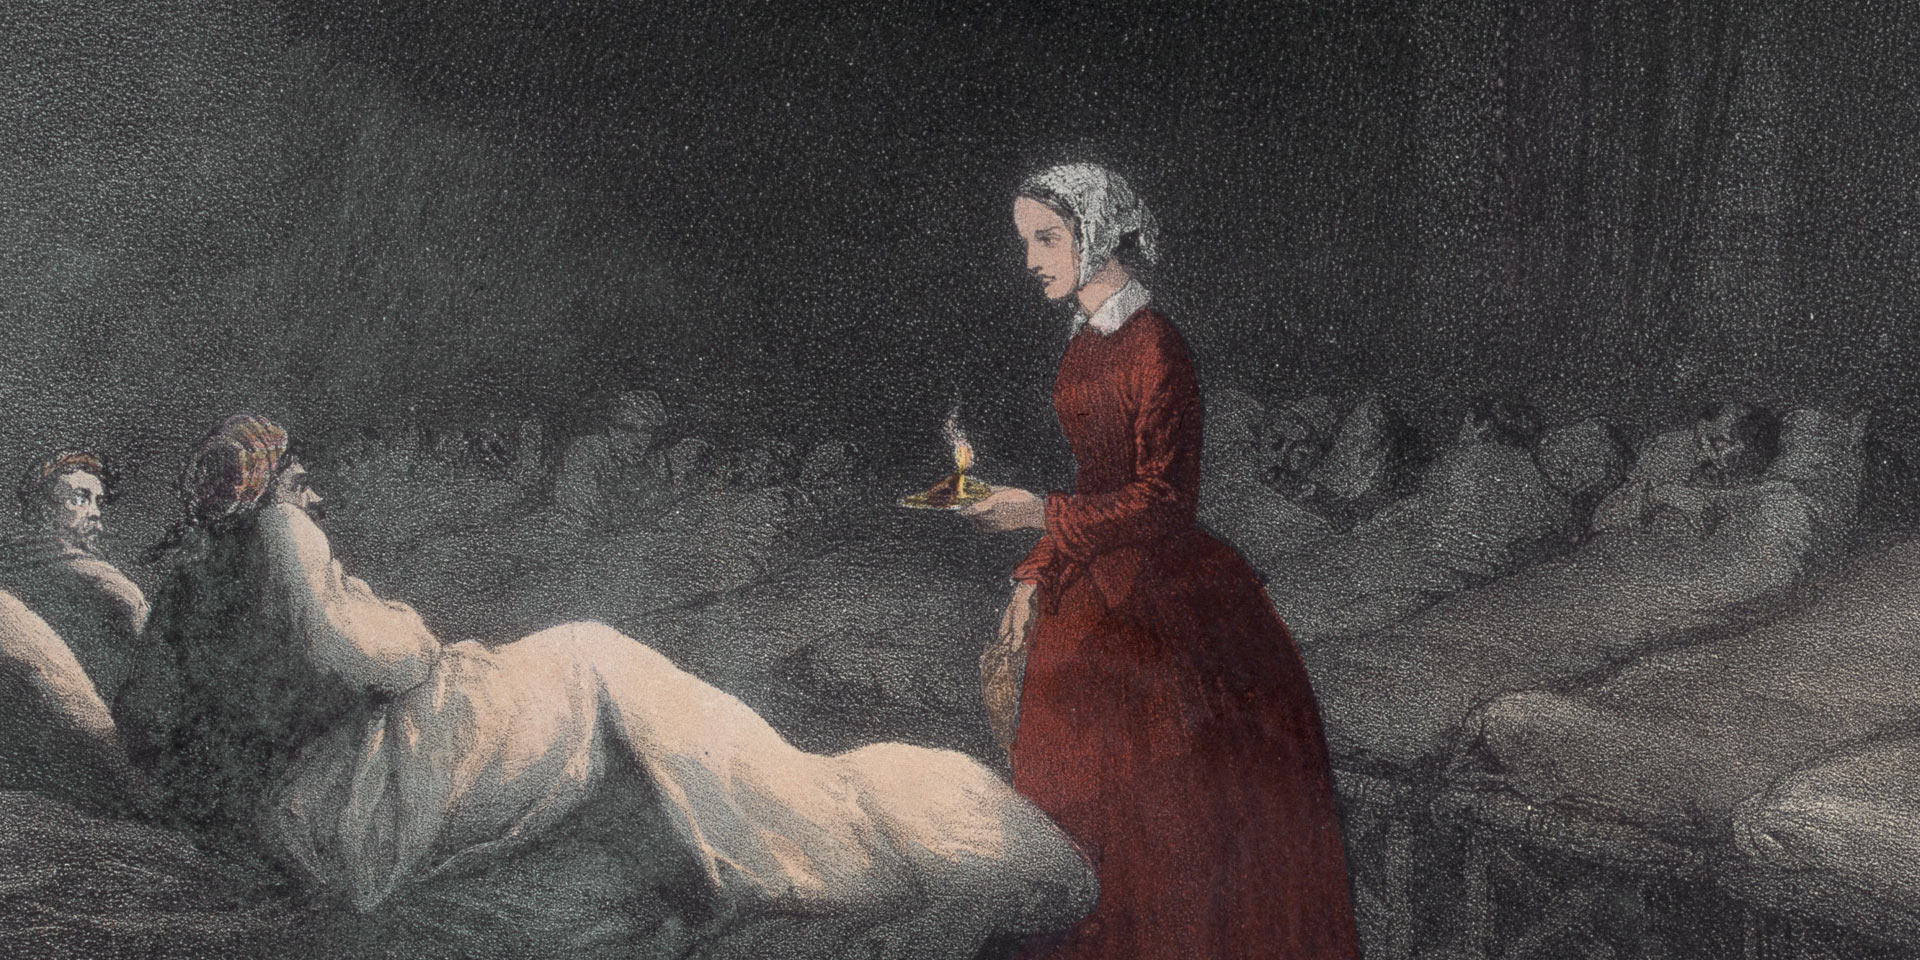 Florence Nightingale tending to wounded soldiers at Scutari Hospital